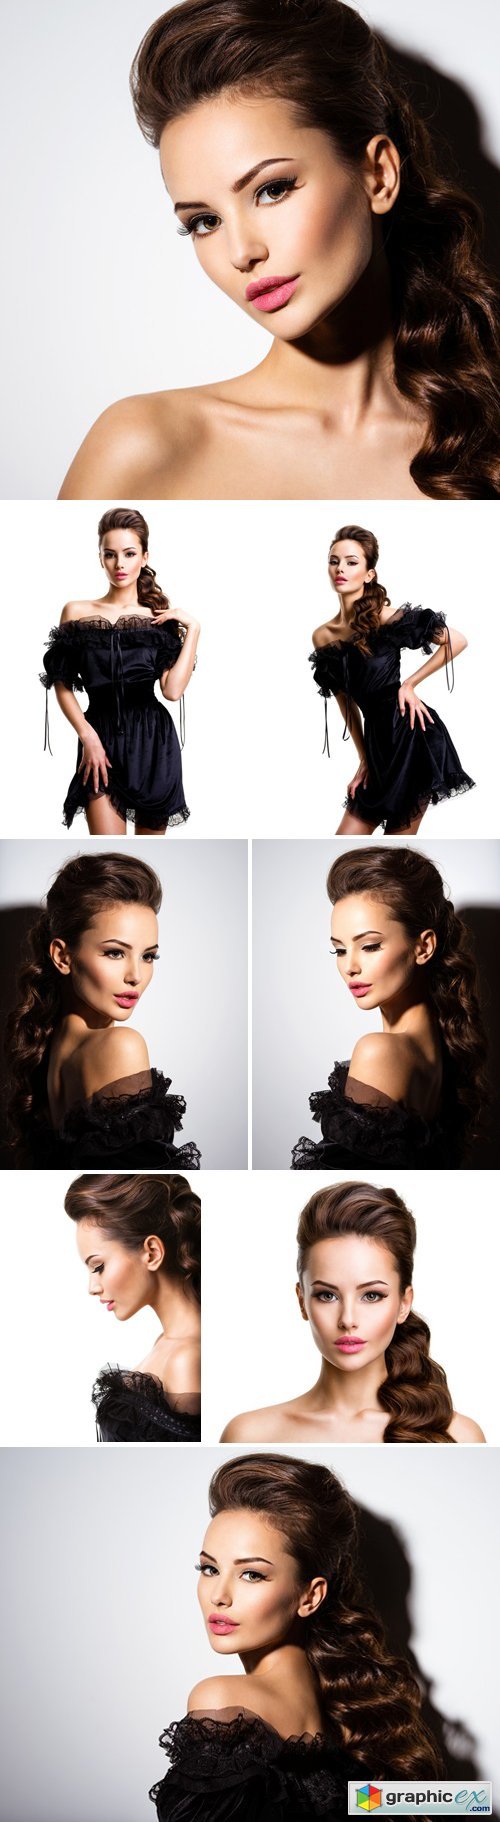 Stock Photos - Beautiful Face Of An Young Sexy Girl In Black Dress Posing At Studio On White Background